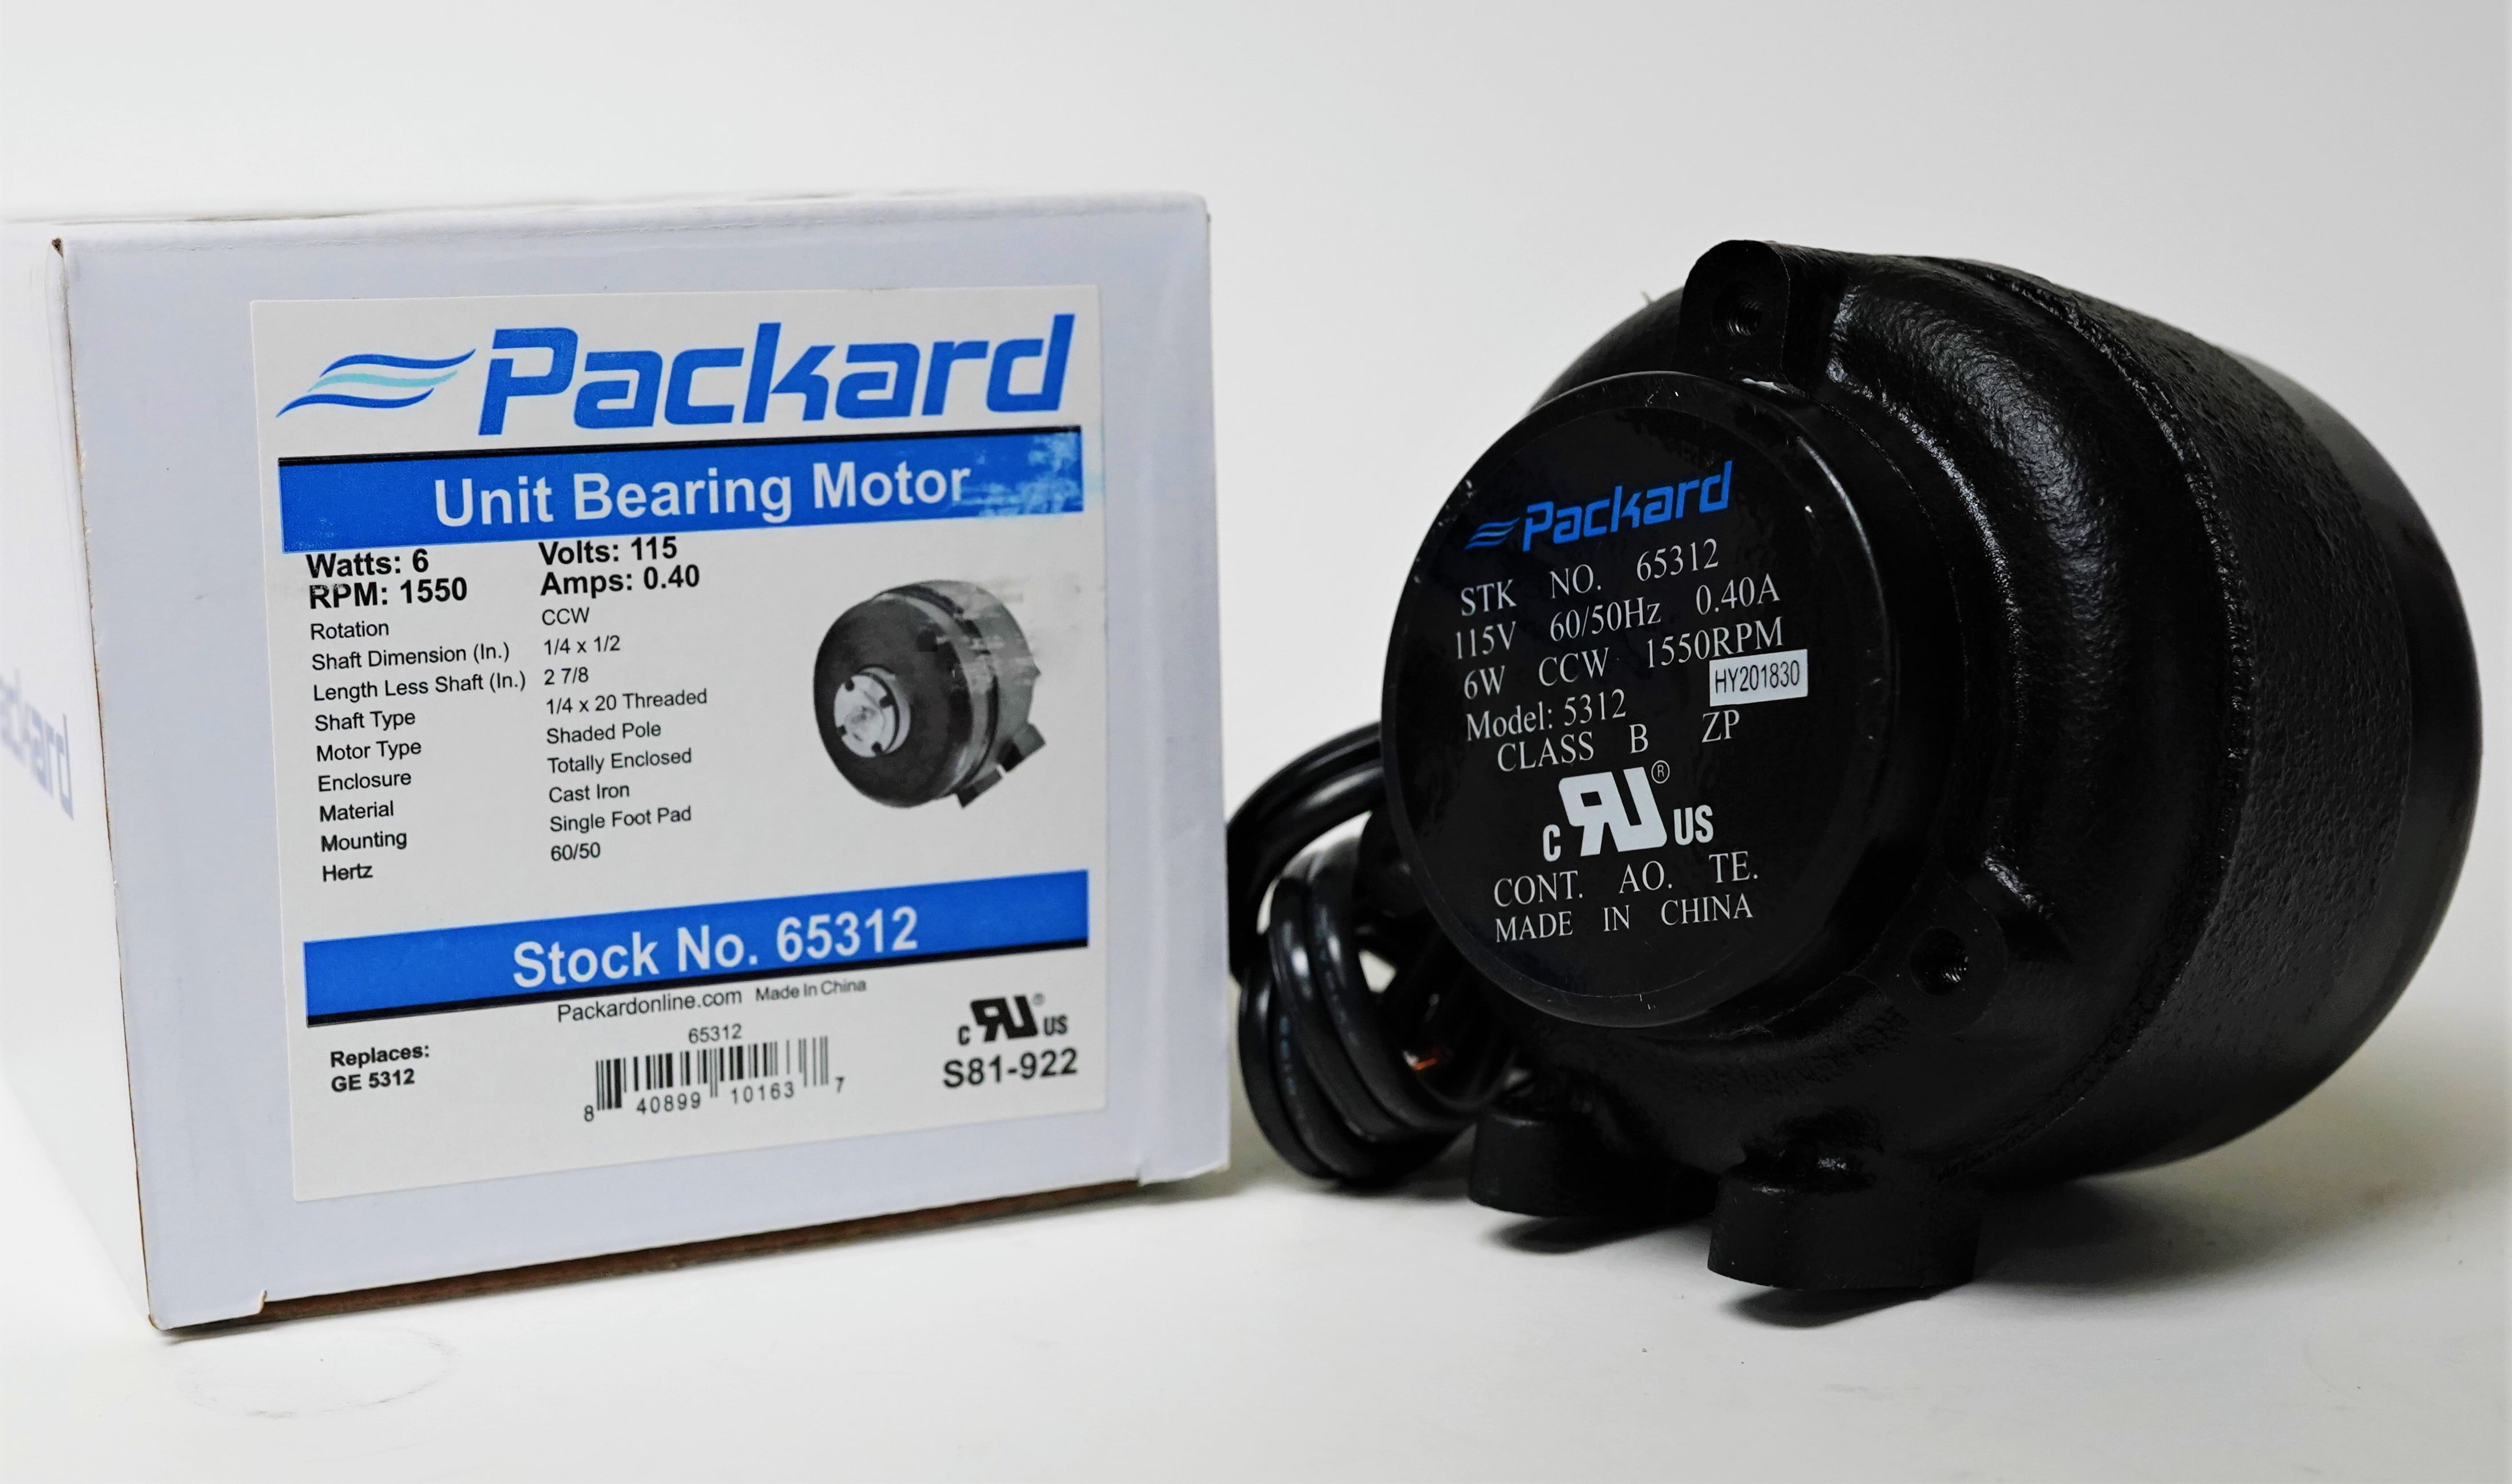 Supco Replacement Unit Bearing Motor Cast Iron 4 Watt 1550 Rpm SM5211 By Packard 